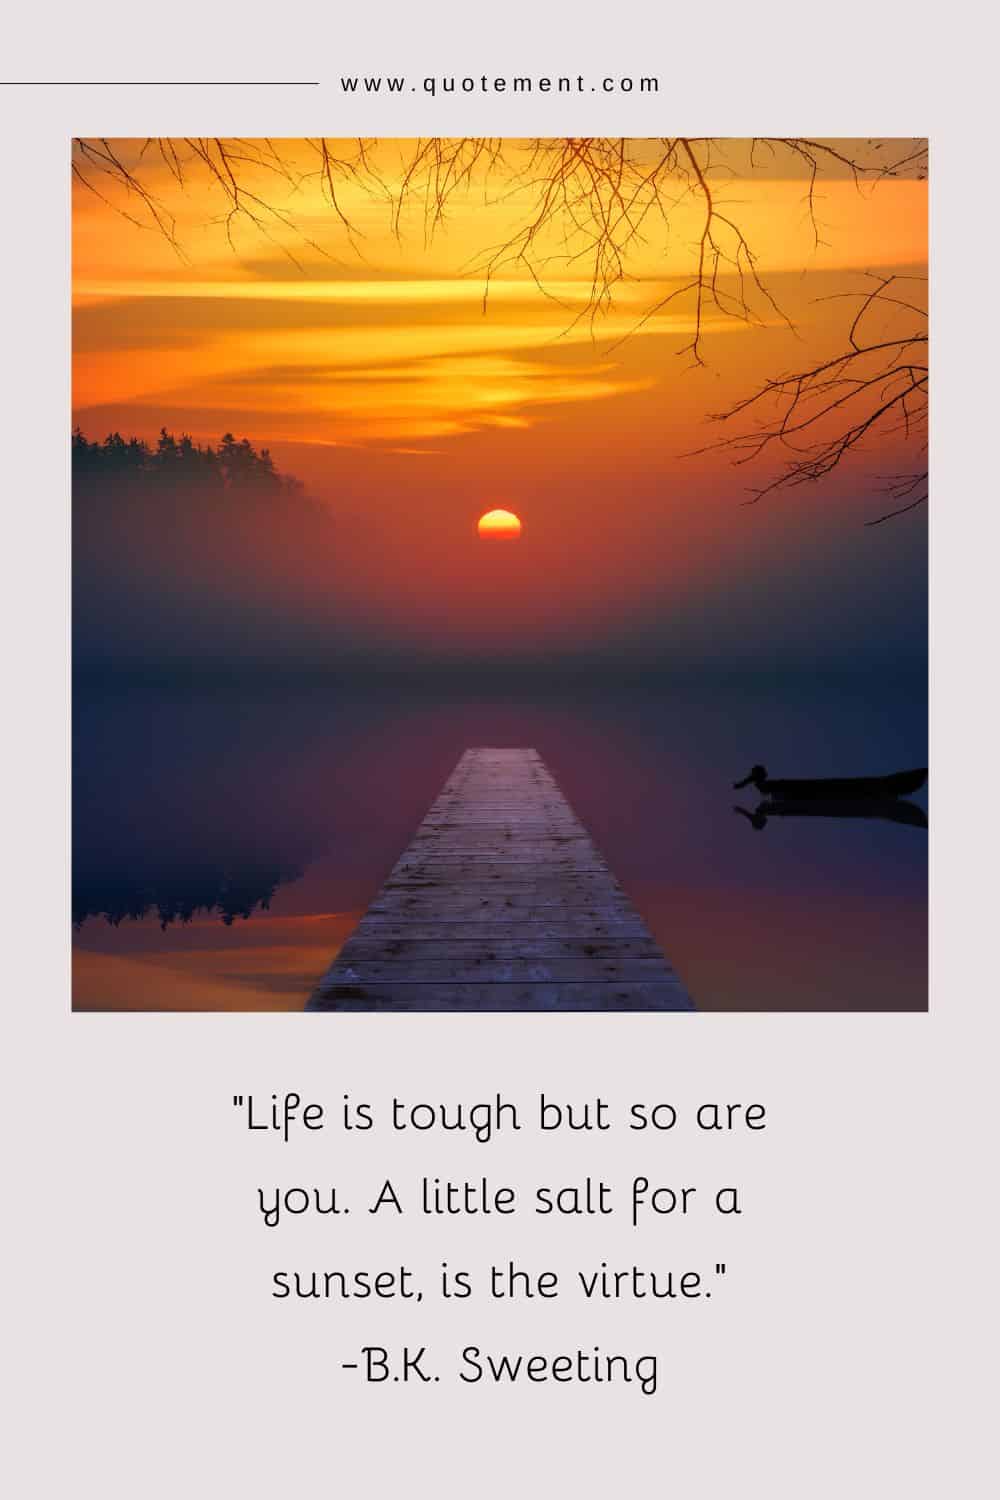 Life is tough but so are you. A little salt for a sunset, is the virtue